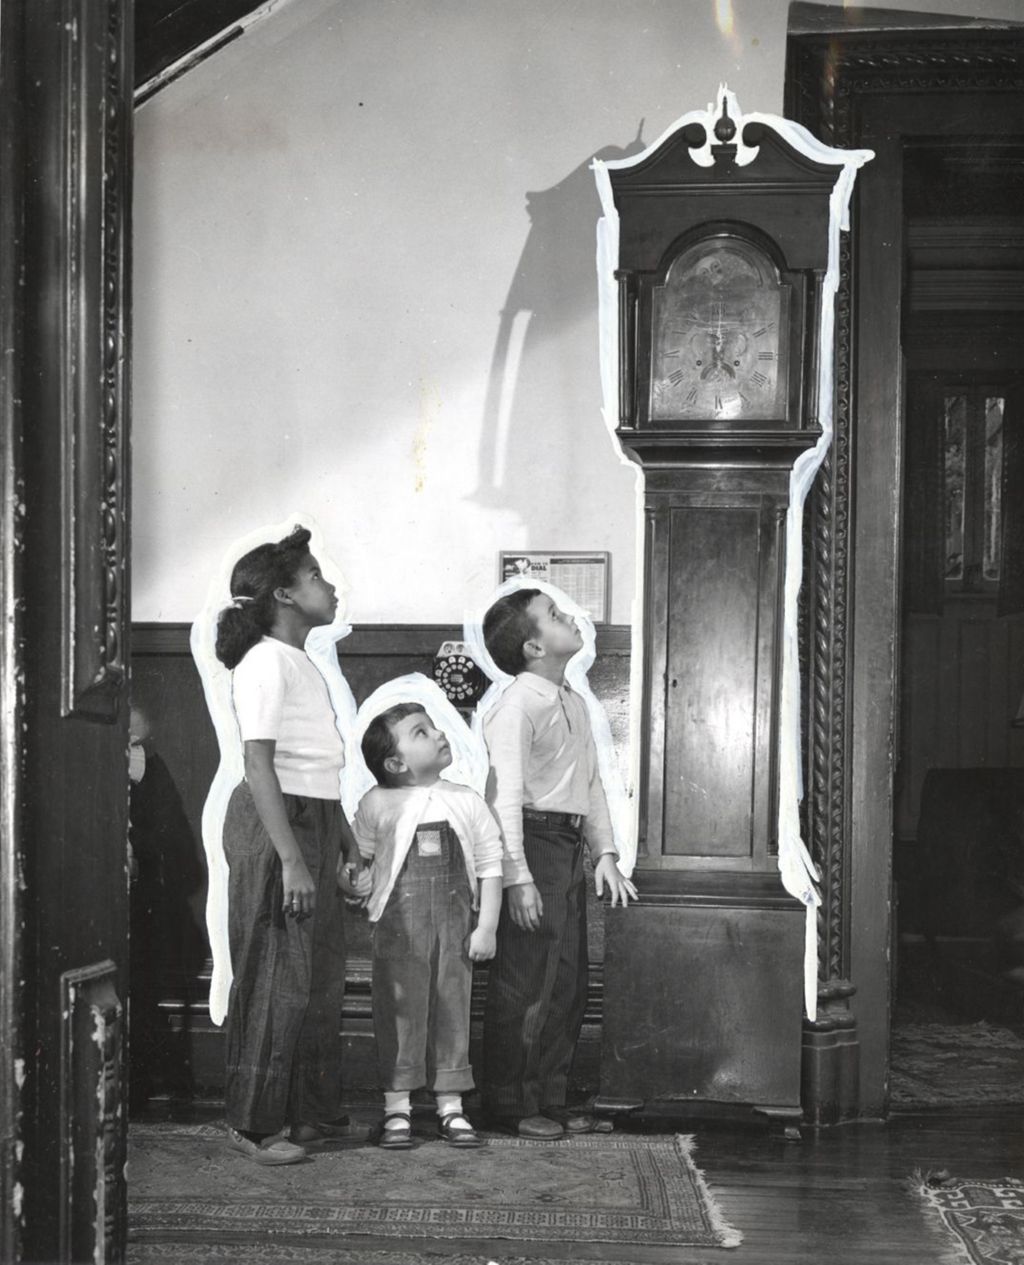 Three children looking up at grandfather clock